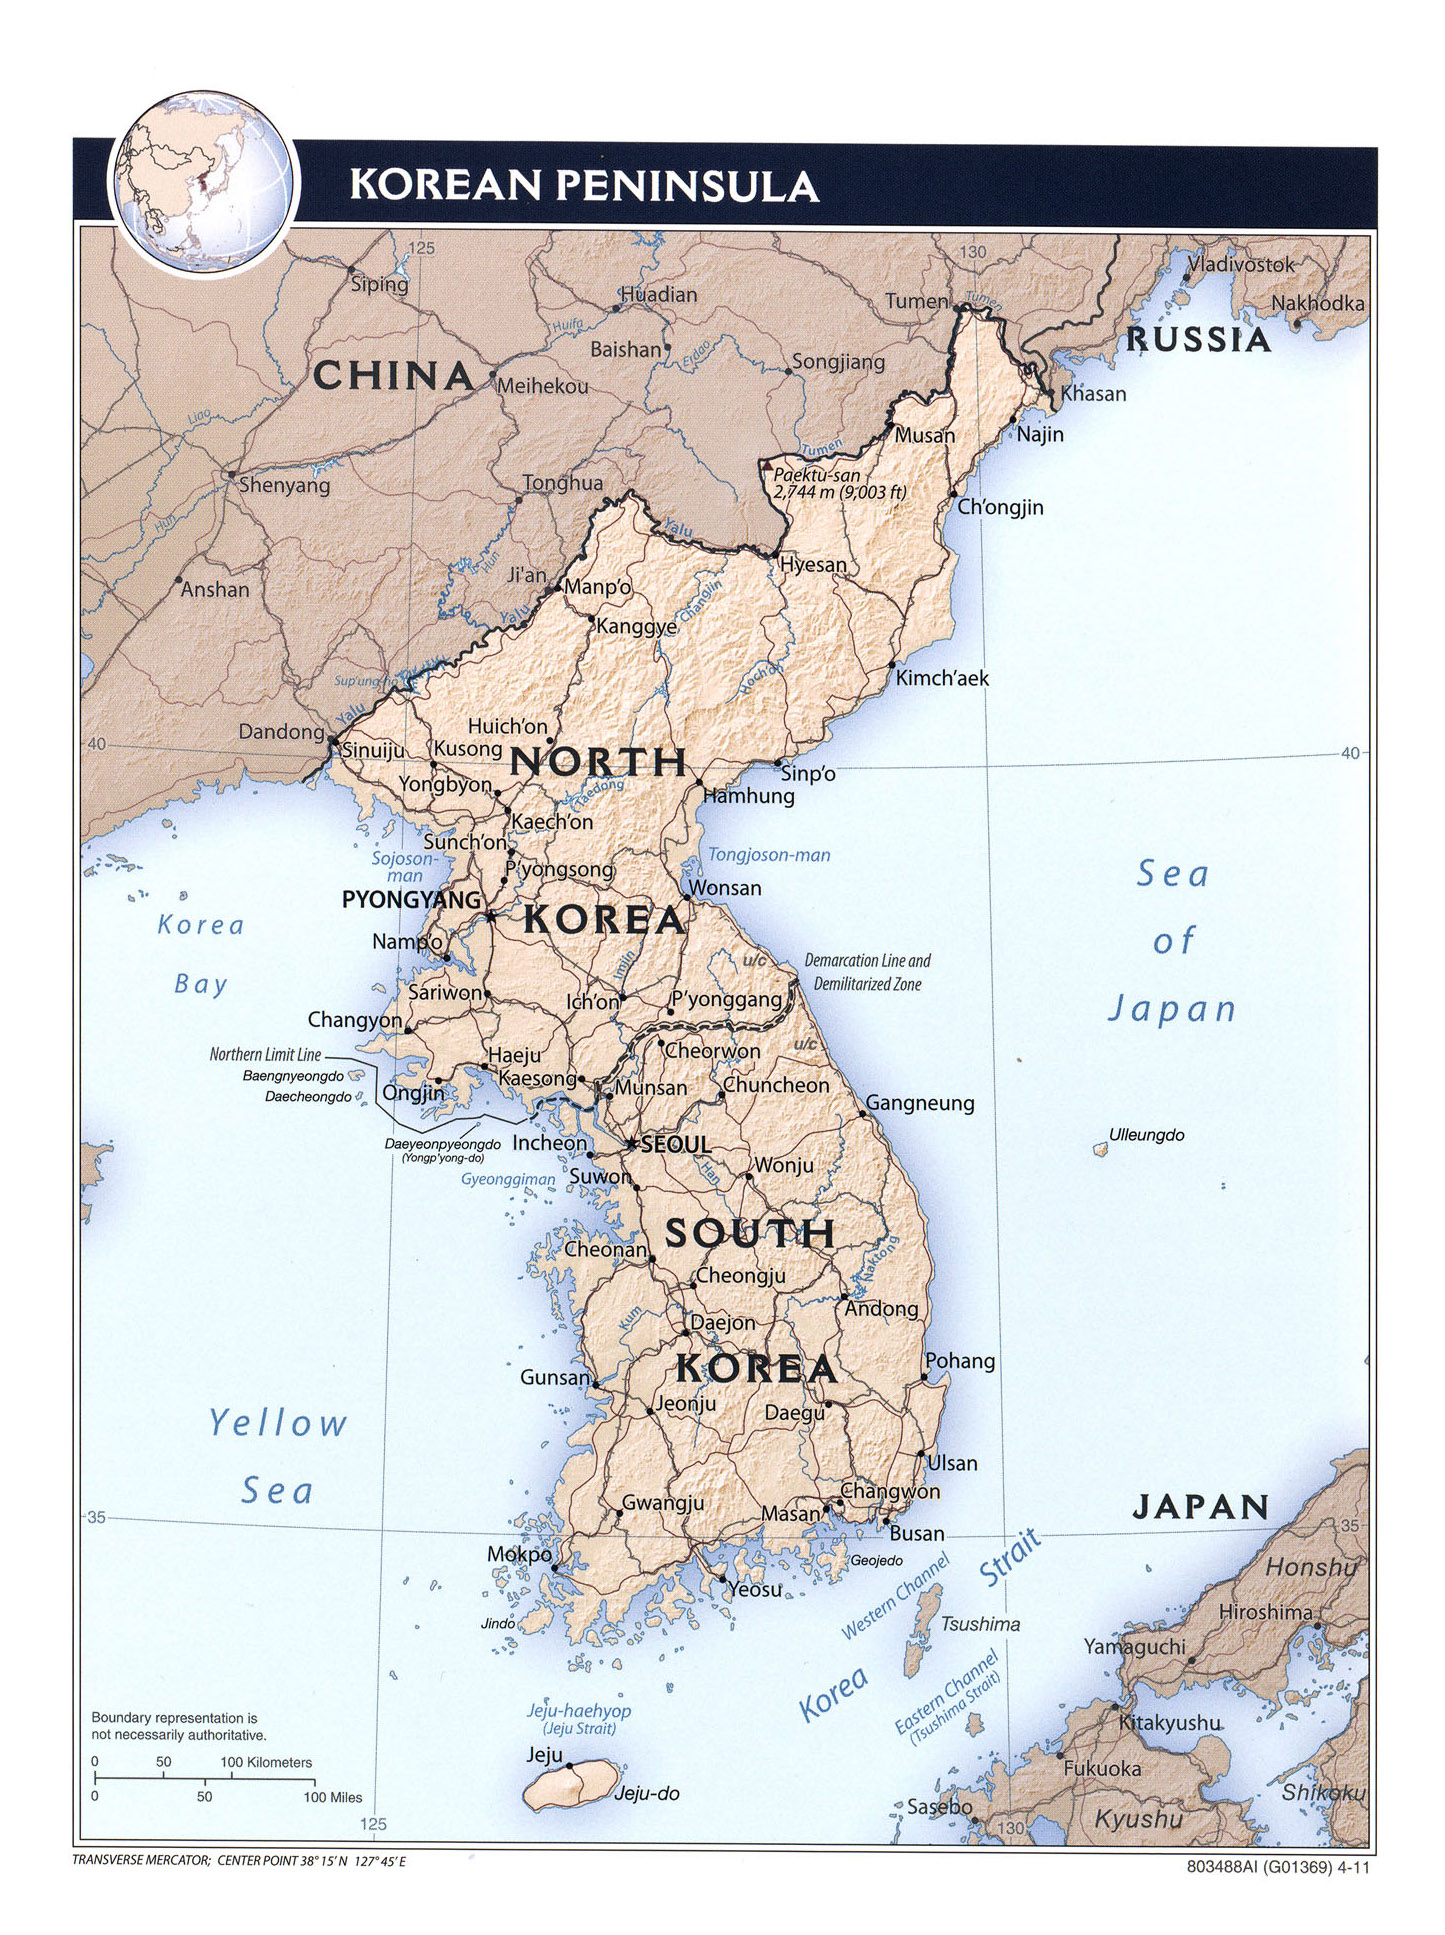 Large Political Map Of Korean Peninsula With Relief Roads Railroads And Major Cities 2011 